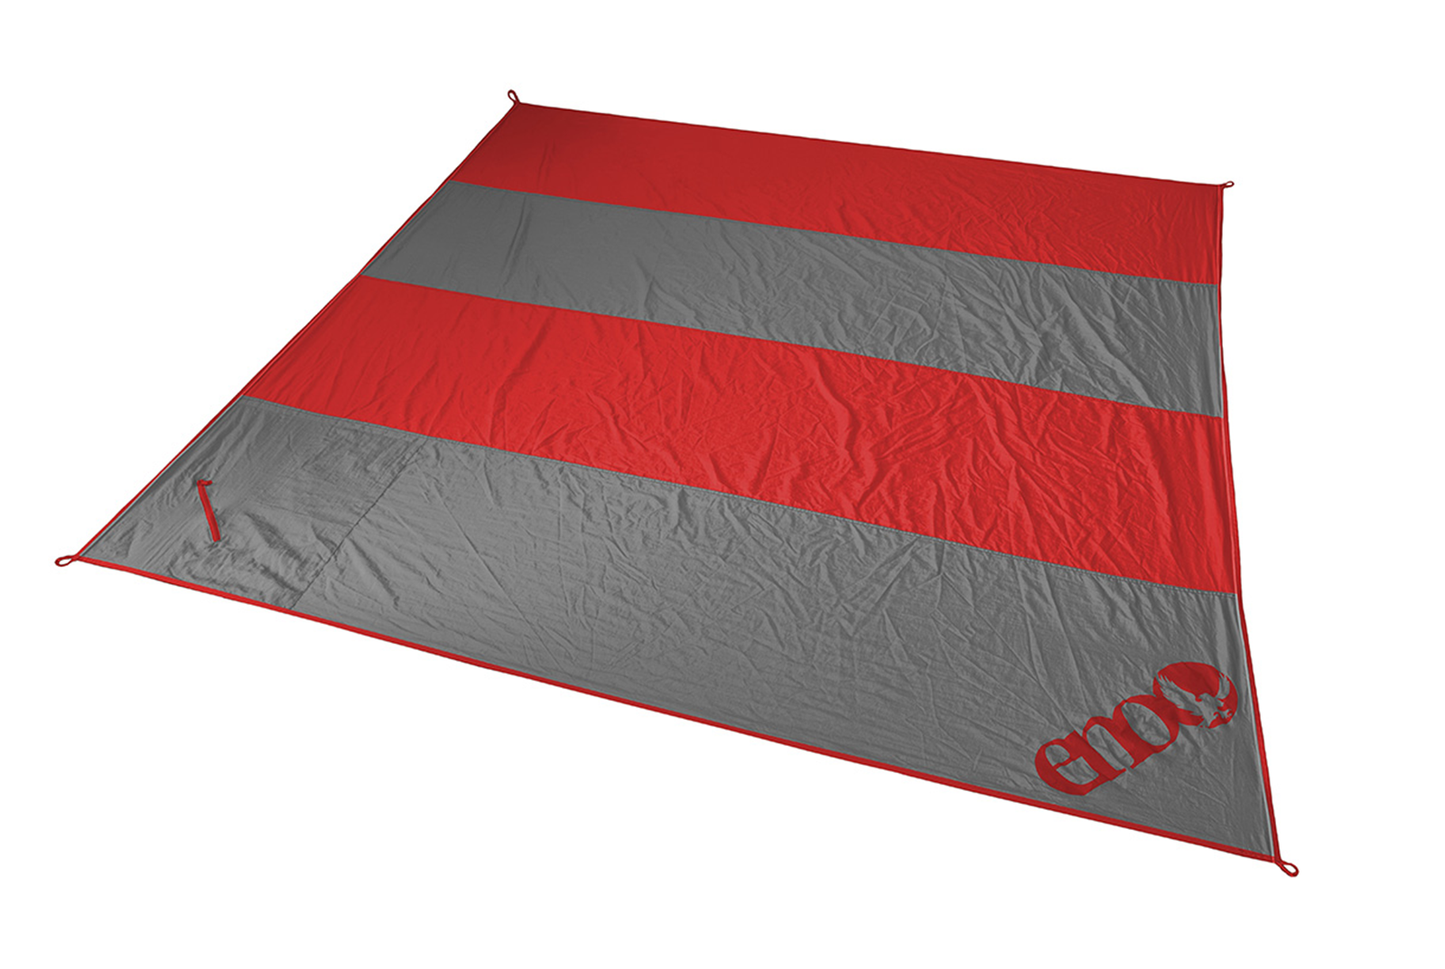 Eagles Nest Outfitters (ENO) Islander Blankets